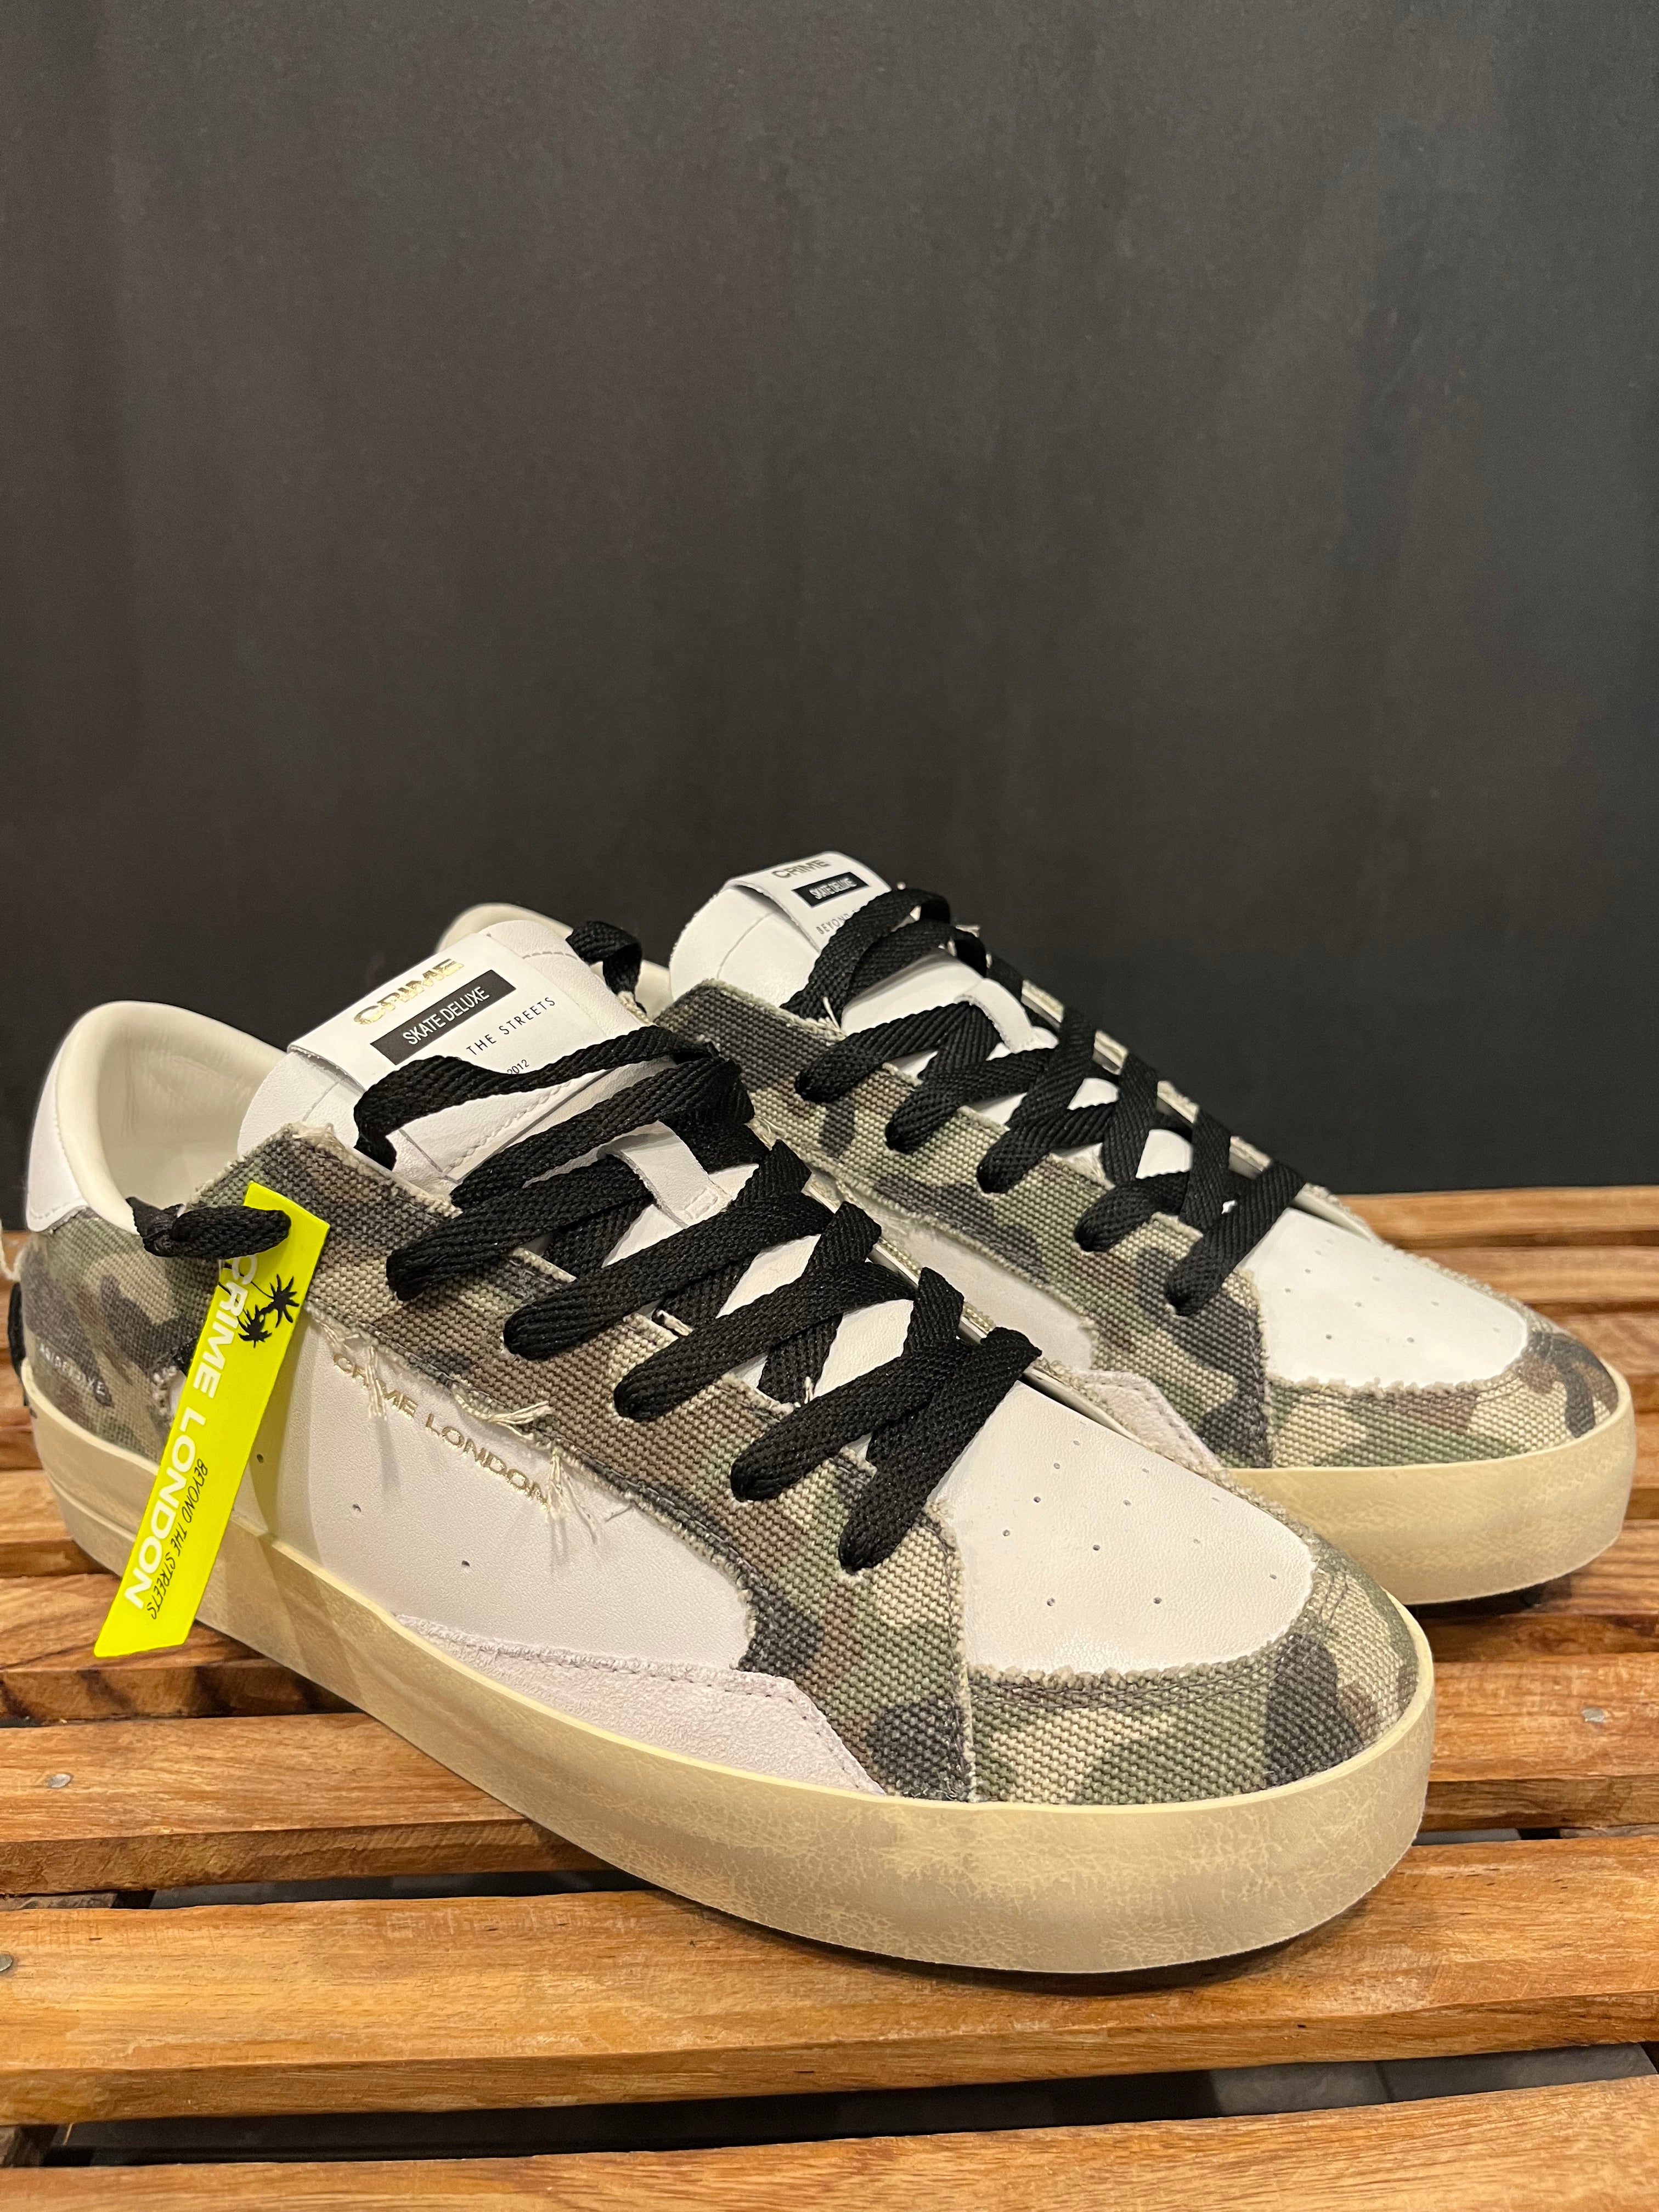 Sneakers crime sk8 deluxe military